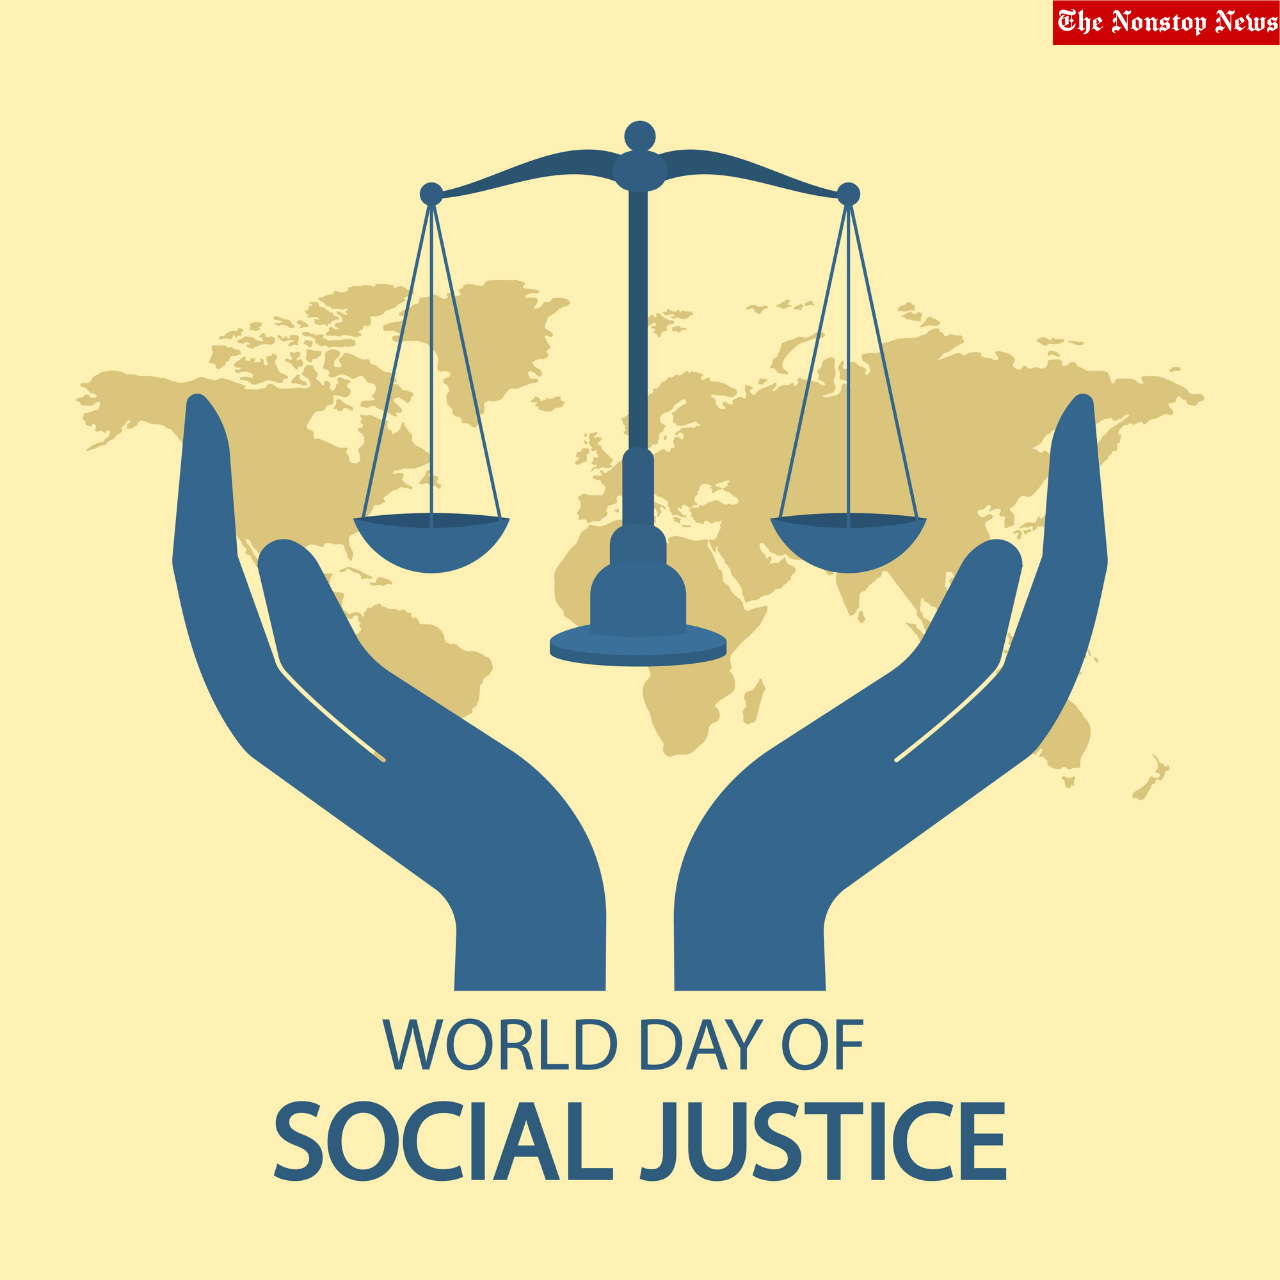 World Social Justice Day 2022 Quotes, Posters, HD Images, Messages, Banners to create awareness